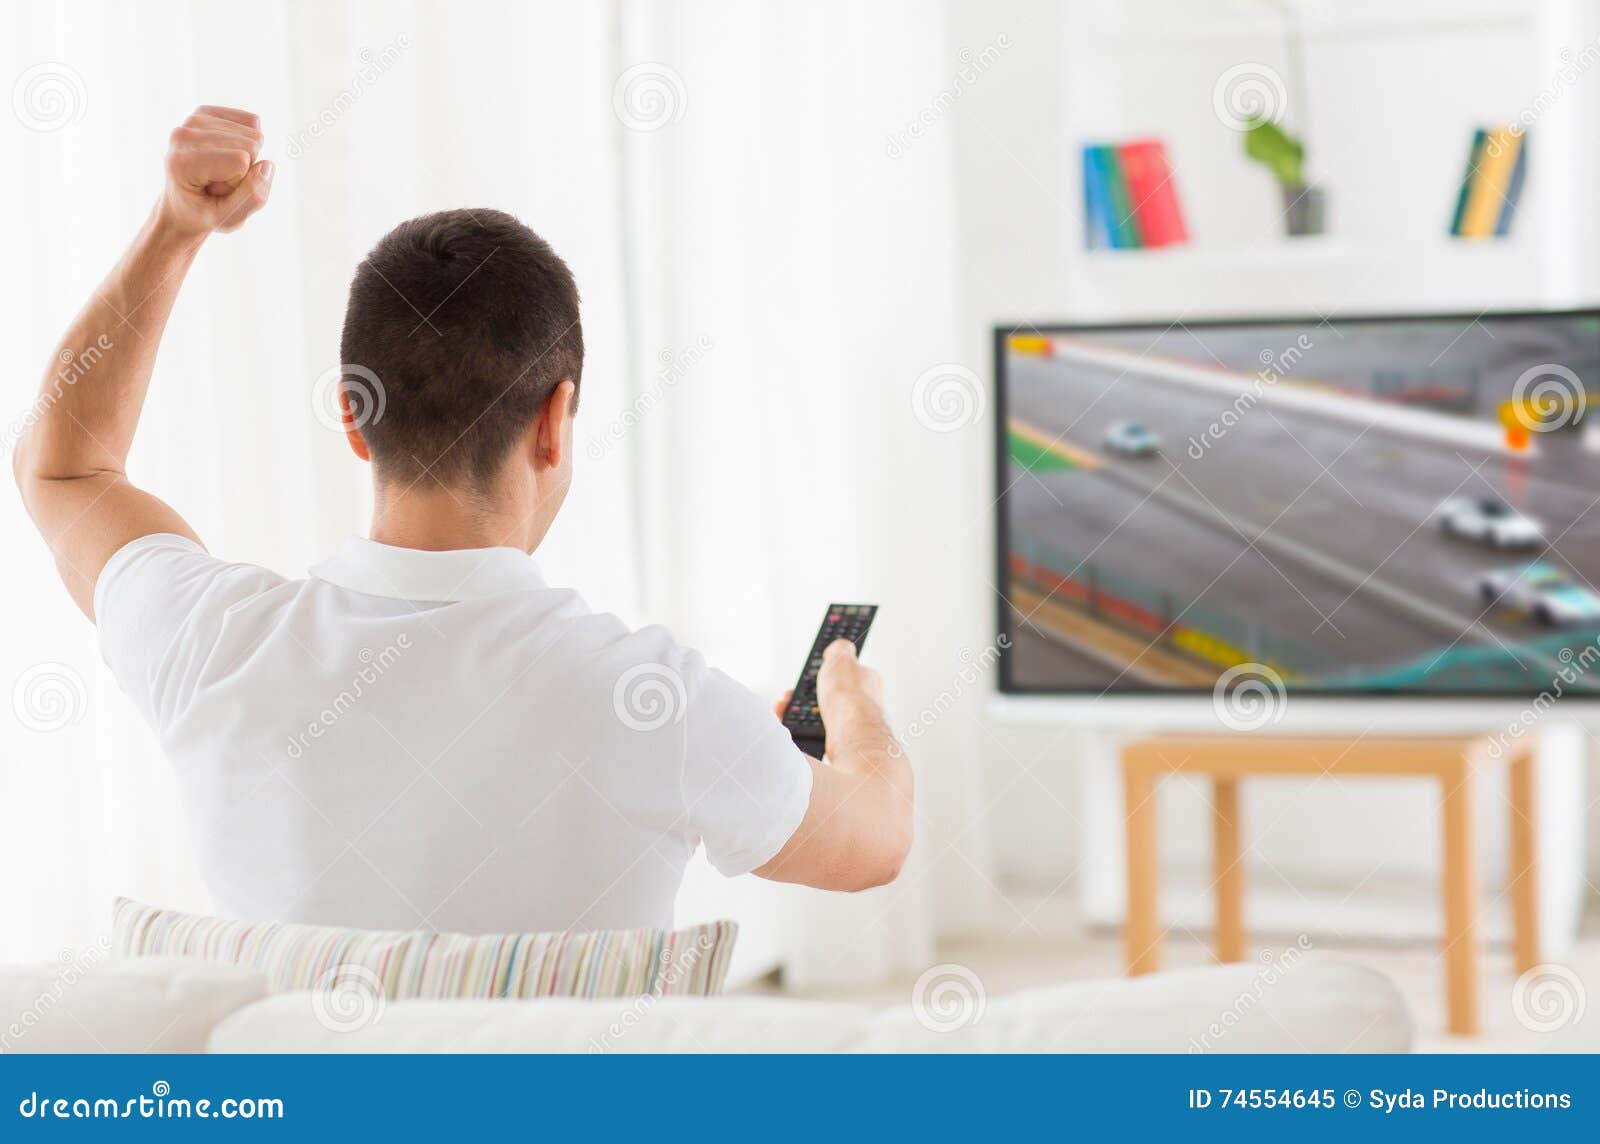 man with remote watching motorsports on tv at home